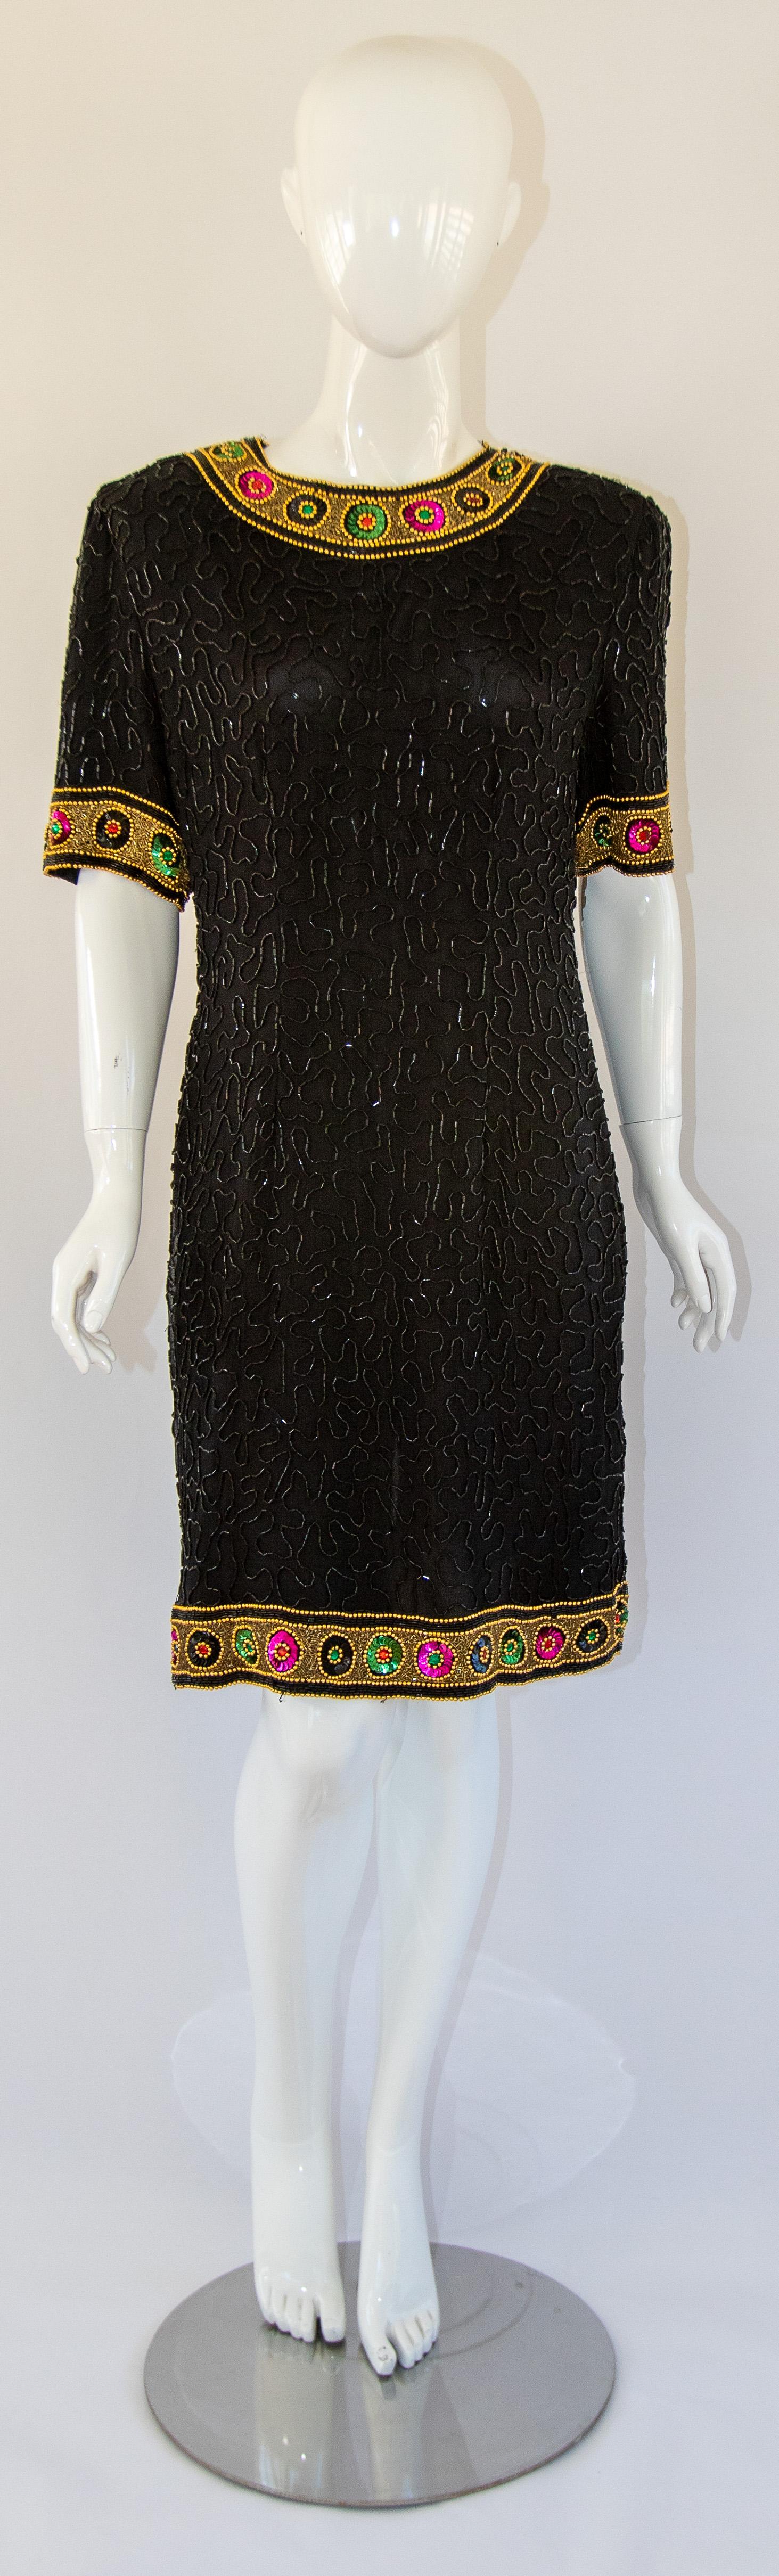 Art Deco Style Beaded Mini Dress Black and Gold by Laurence Kazar New York.
1980s black 100 % pure silk sequin cocktail dress beaded short dress.
Vintage black mini dress heavily beaded with black & gold beads.
Completely covered in beads, with a